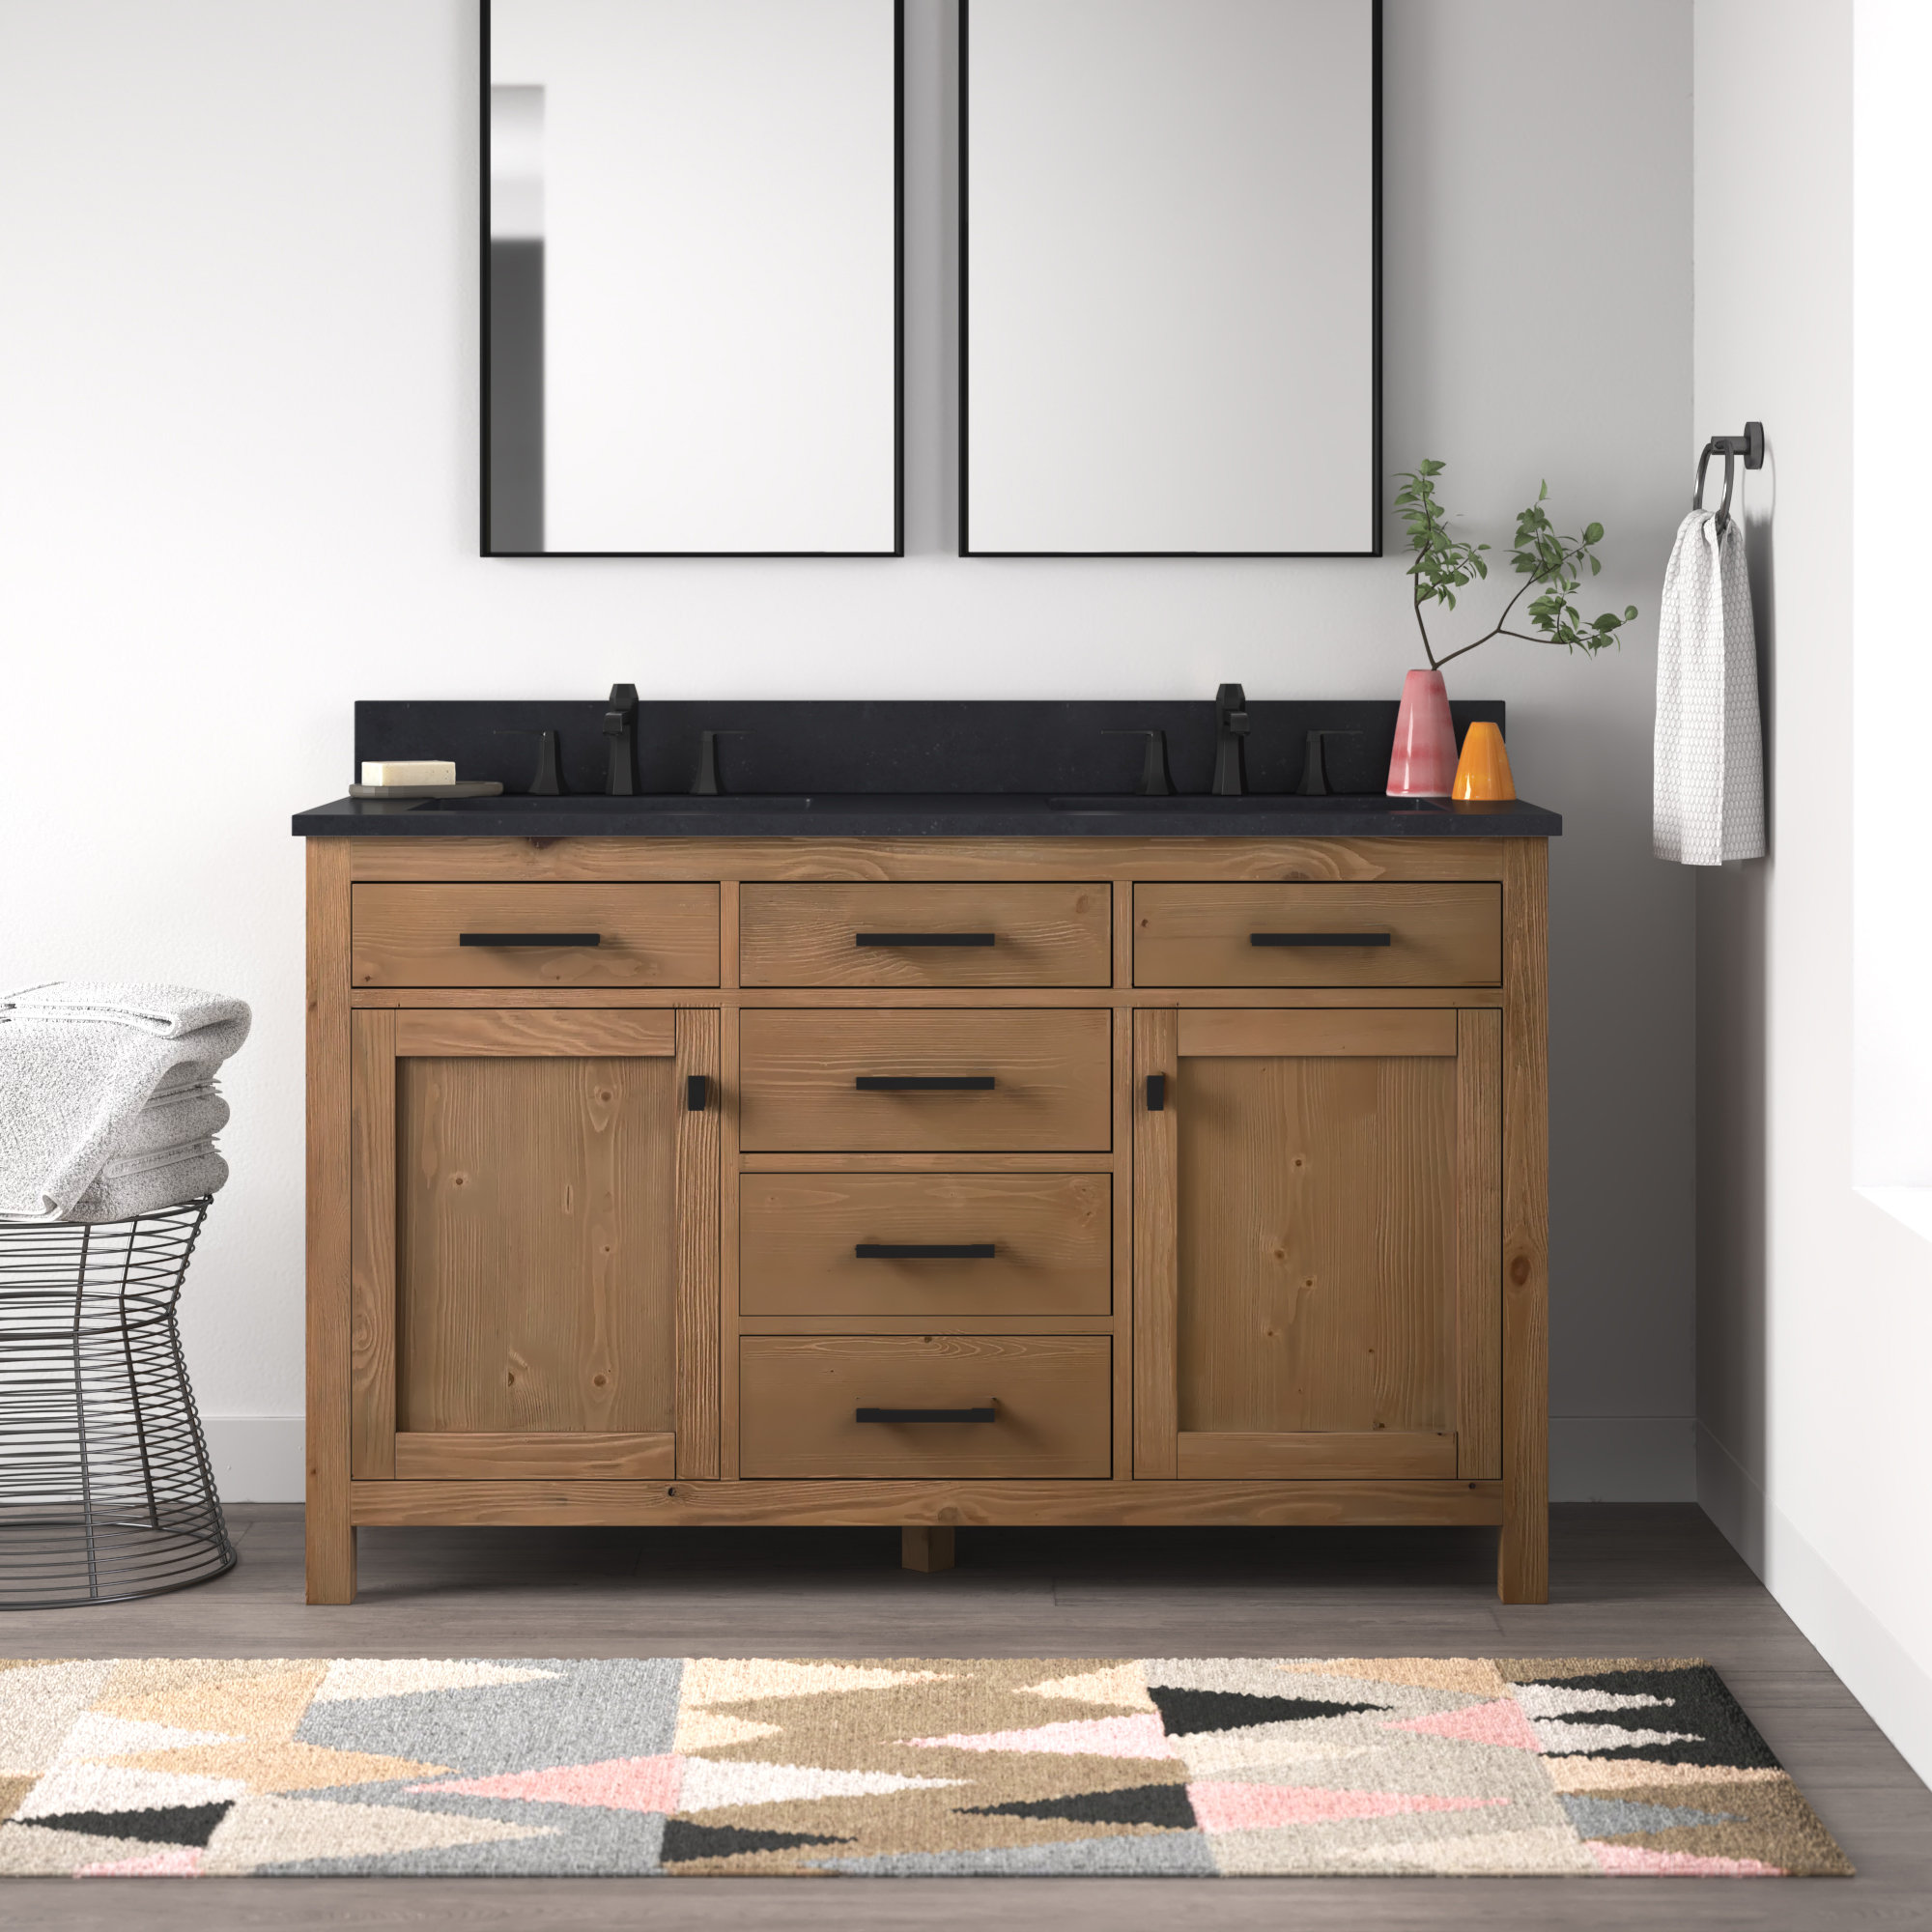 How to Build a Faux Drawer Bathroom Vanity to Maximize Storage Space